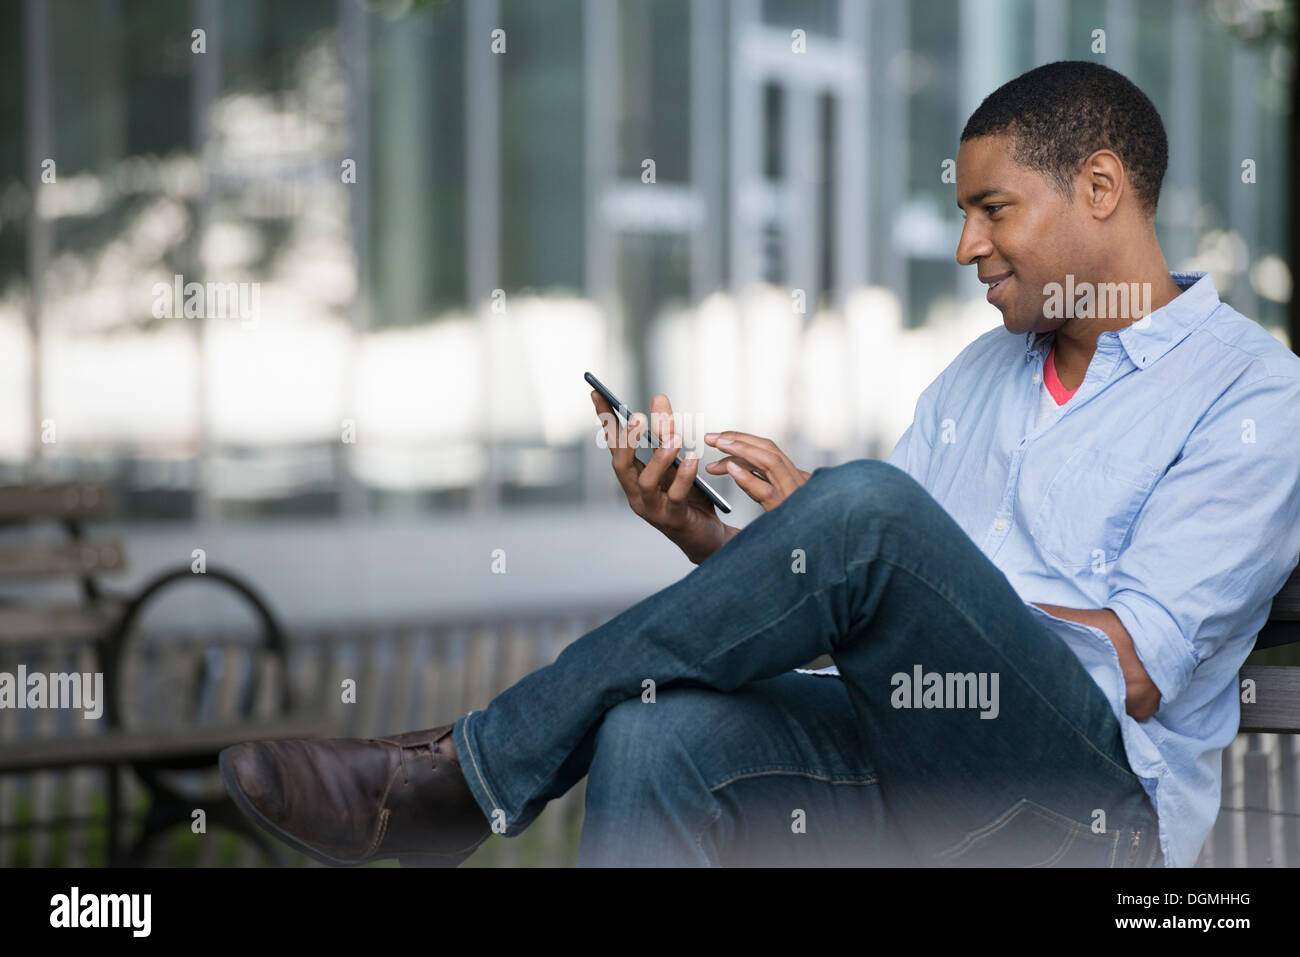 Summer in the city. People outdoors, keeping in touch while on the move. A man sitting on a bench using a digital tablet. Stock Photo